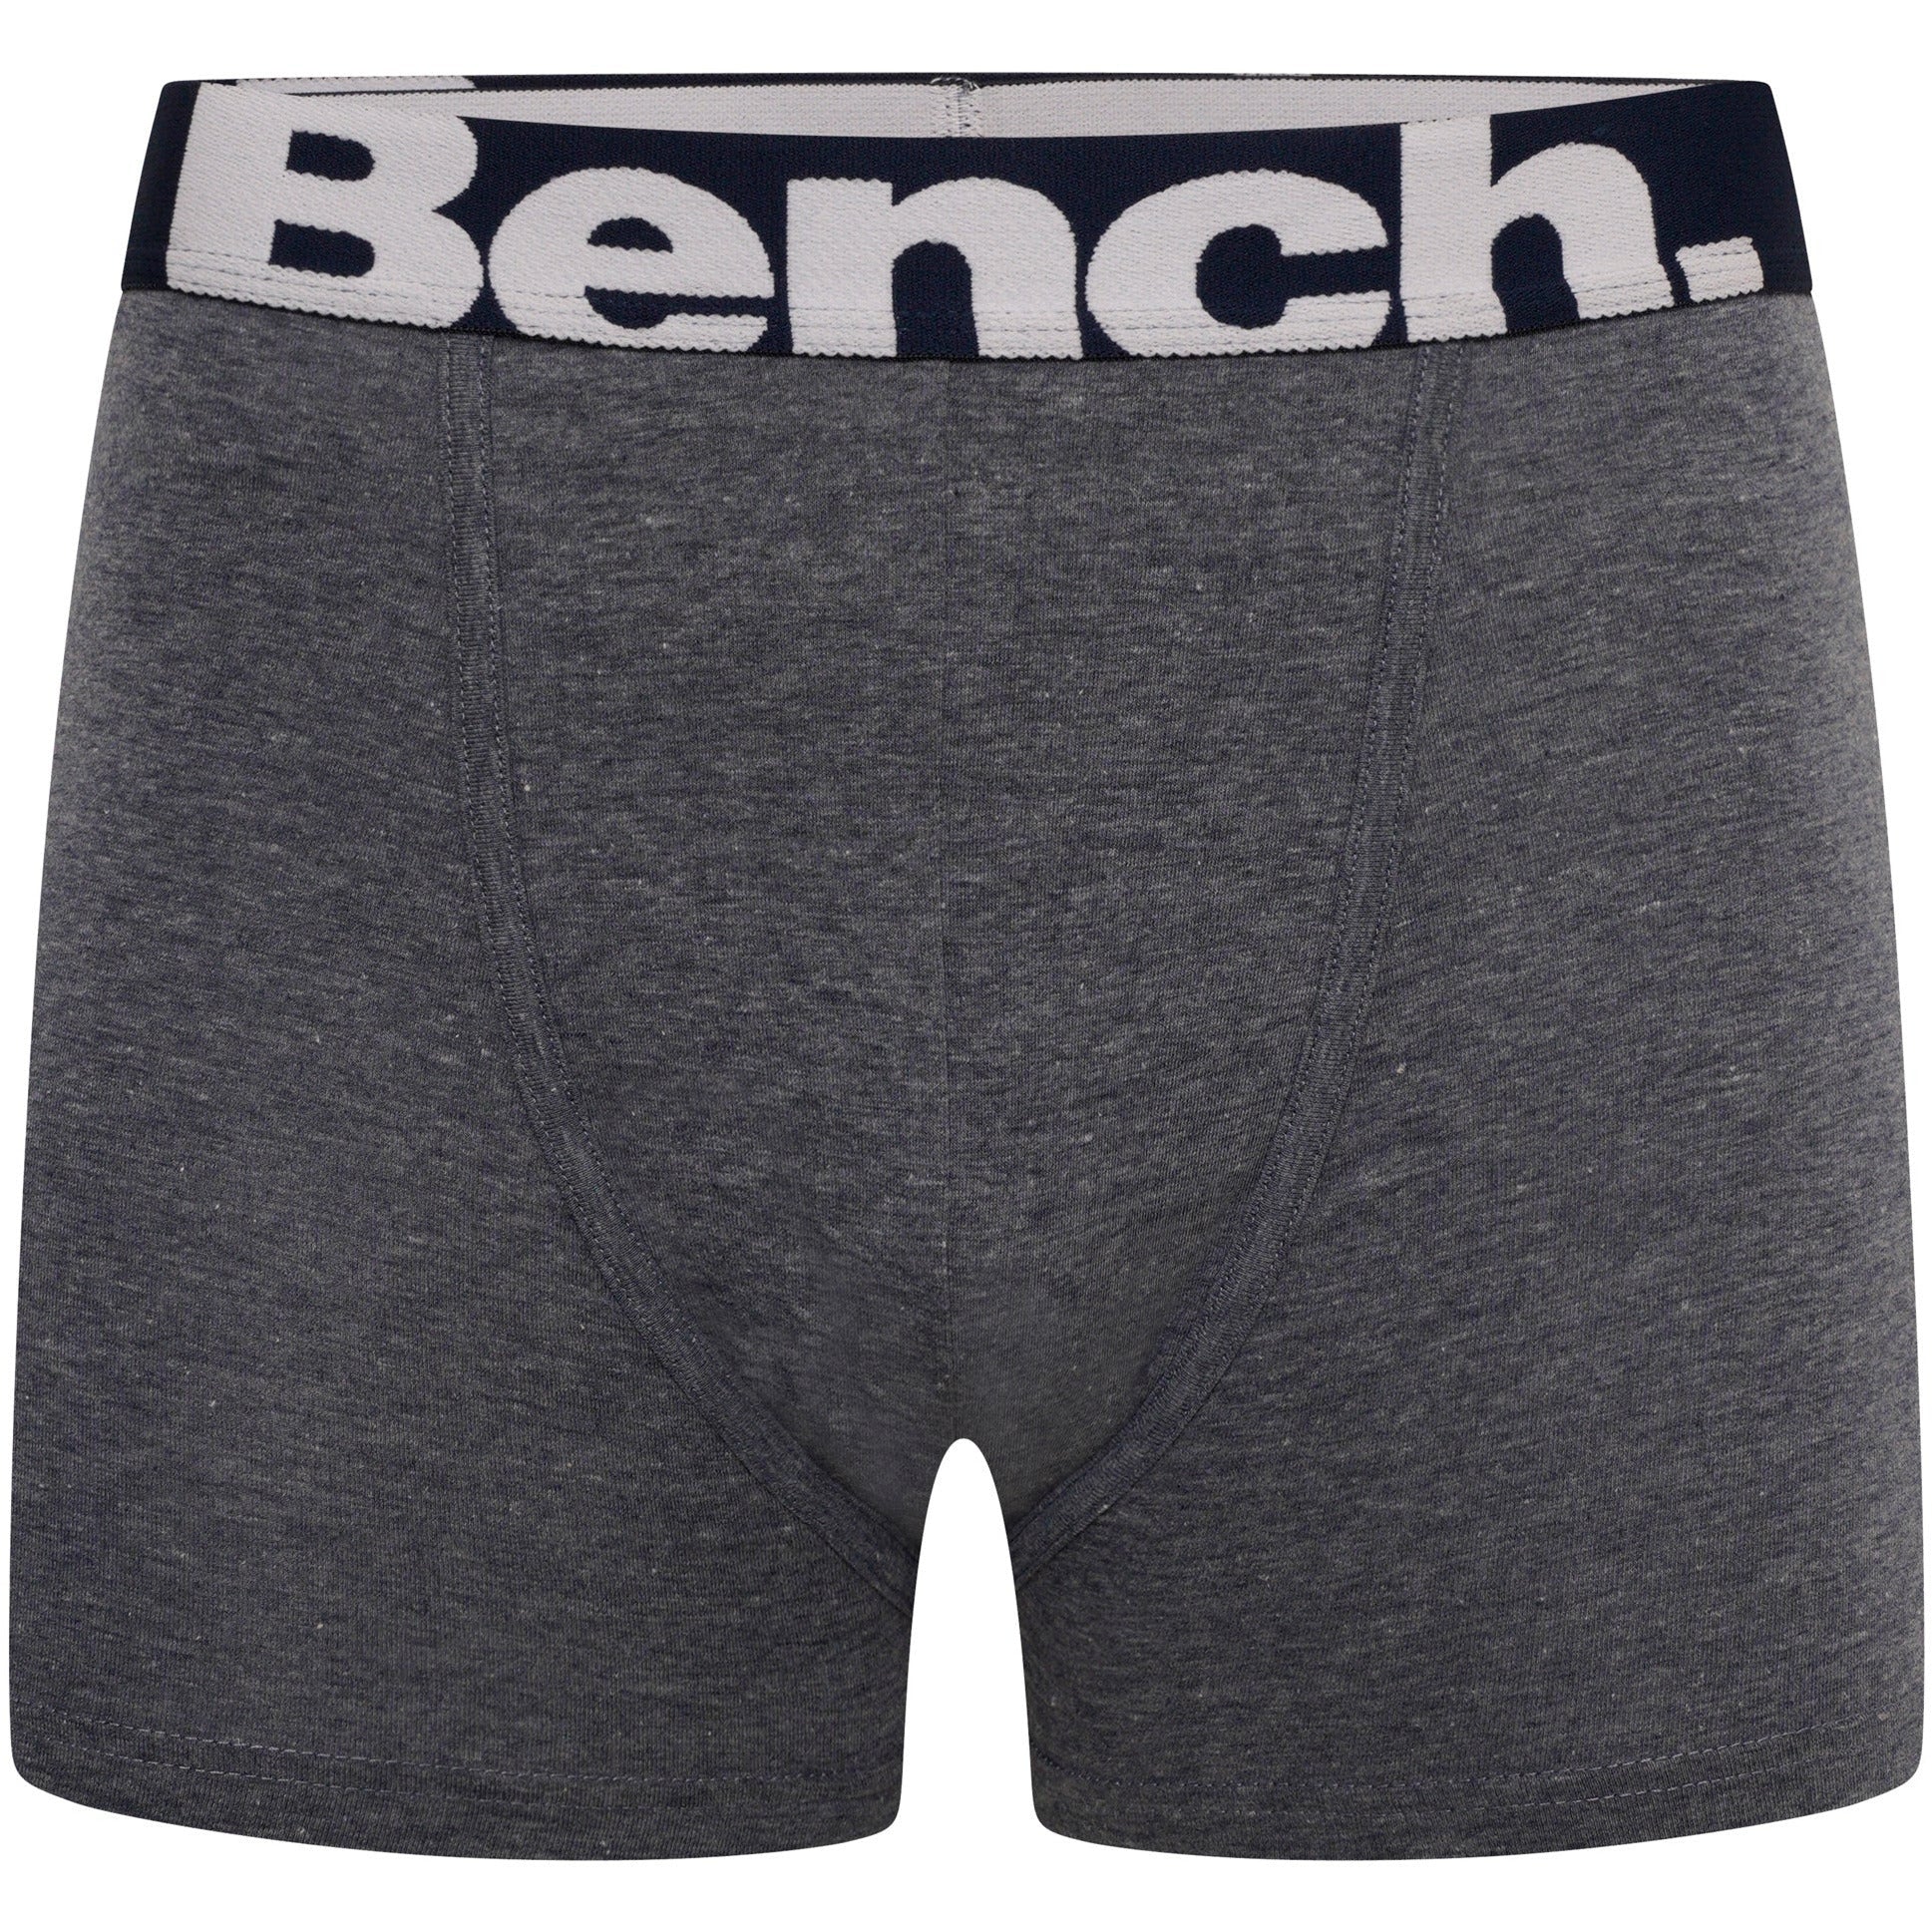 Mens 'KEATING' 7 Pack Boxers - ASSORTED - Shop at www.Bench.co.uk #LoveMyHood